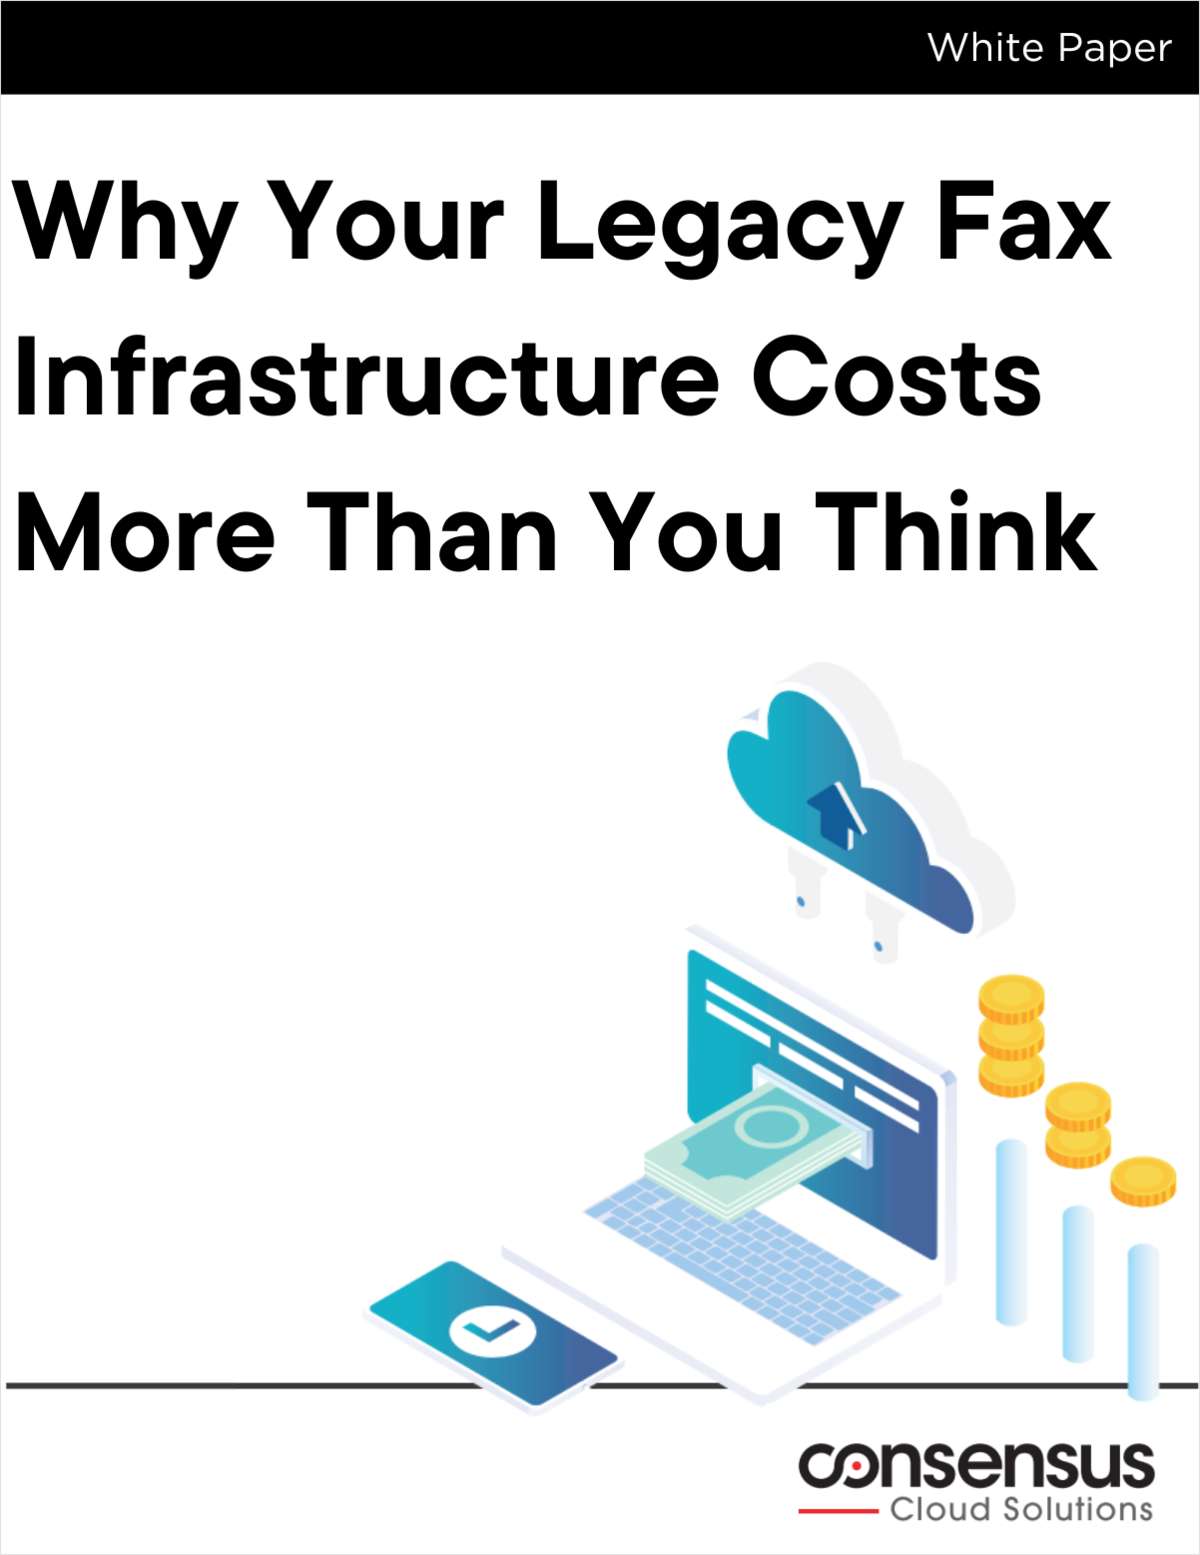 Why Your Legacy Fax Infrastructure Costs More Than You Think